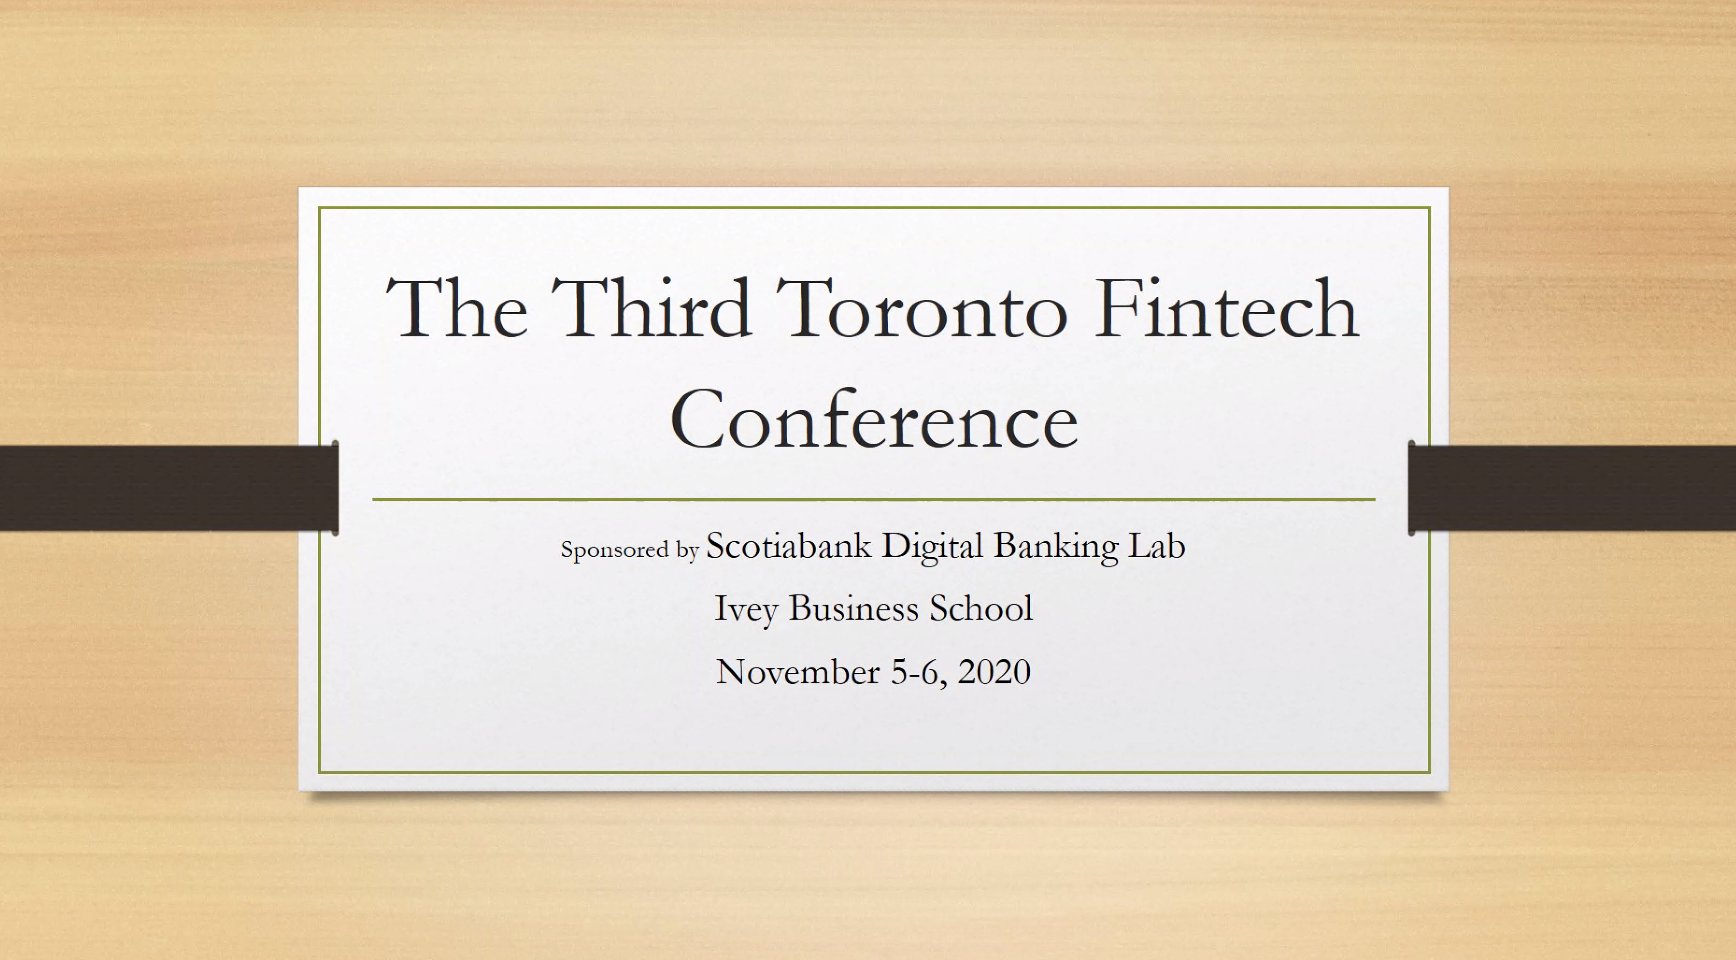 Ivey FinTech on Twitter: "The winner of the best PhD paper prize at the 3rd Toro